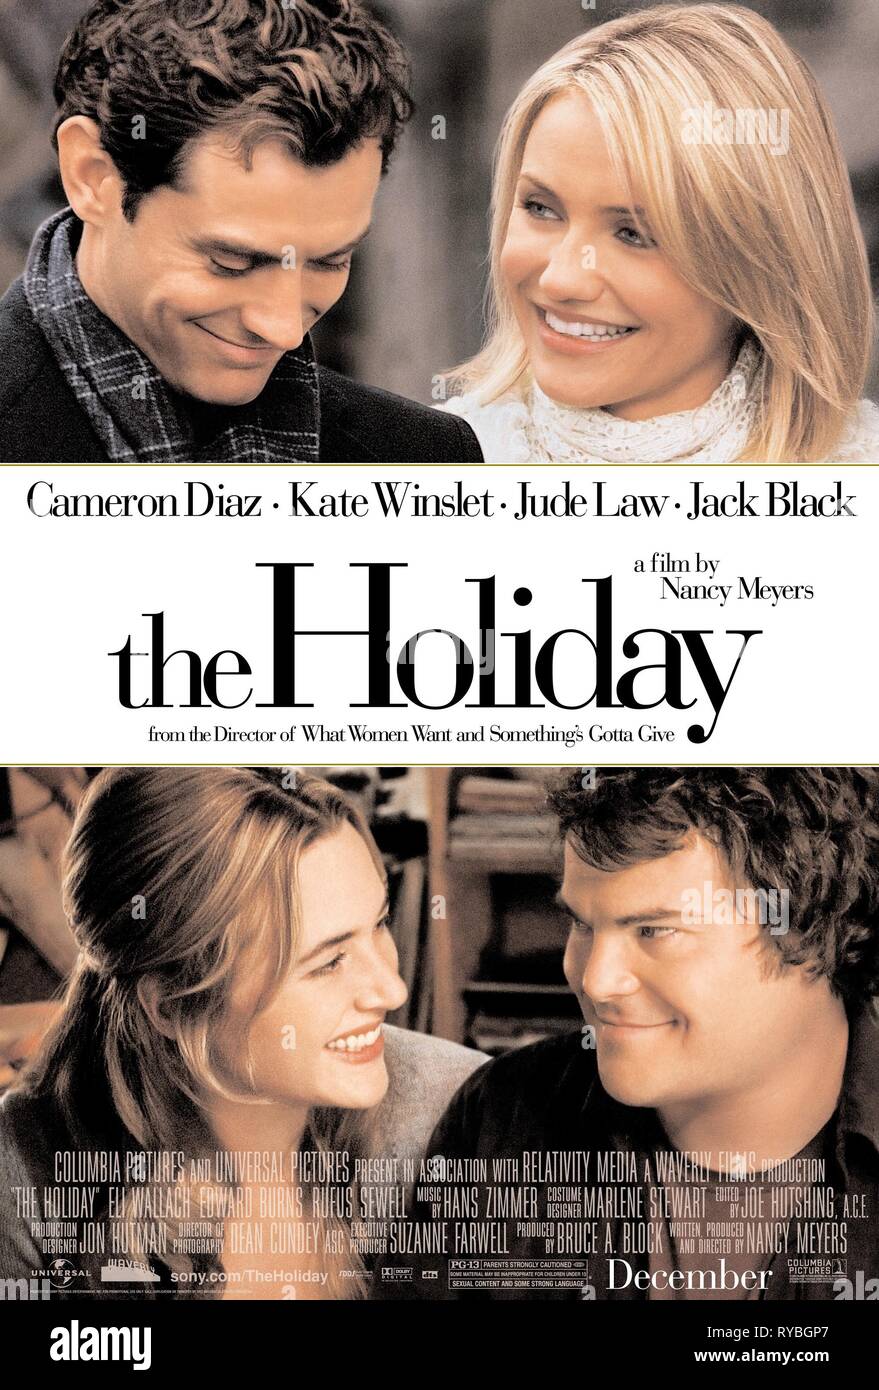 jude law cameron diaz kate winsletjack black poster the holiday 2006 RYBGP7